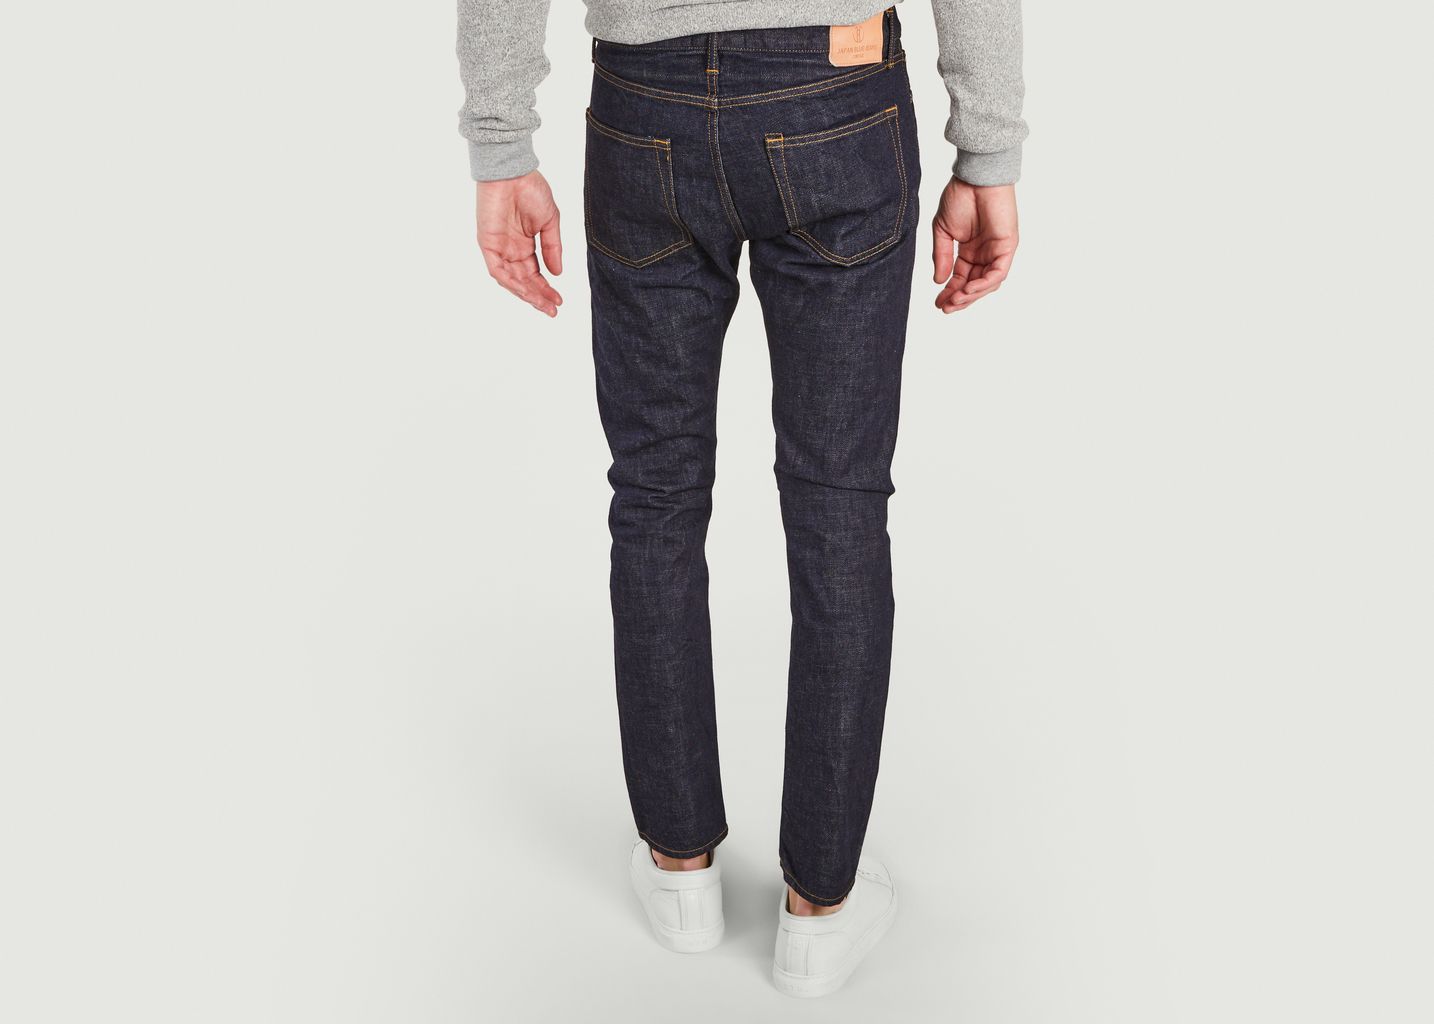 Circle selvedge skinny brutto jeans - Japan Blue Jeans